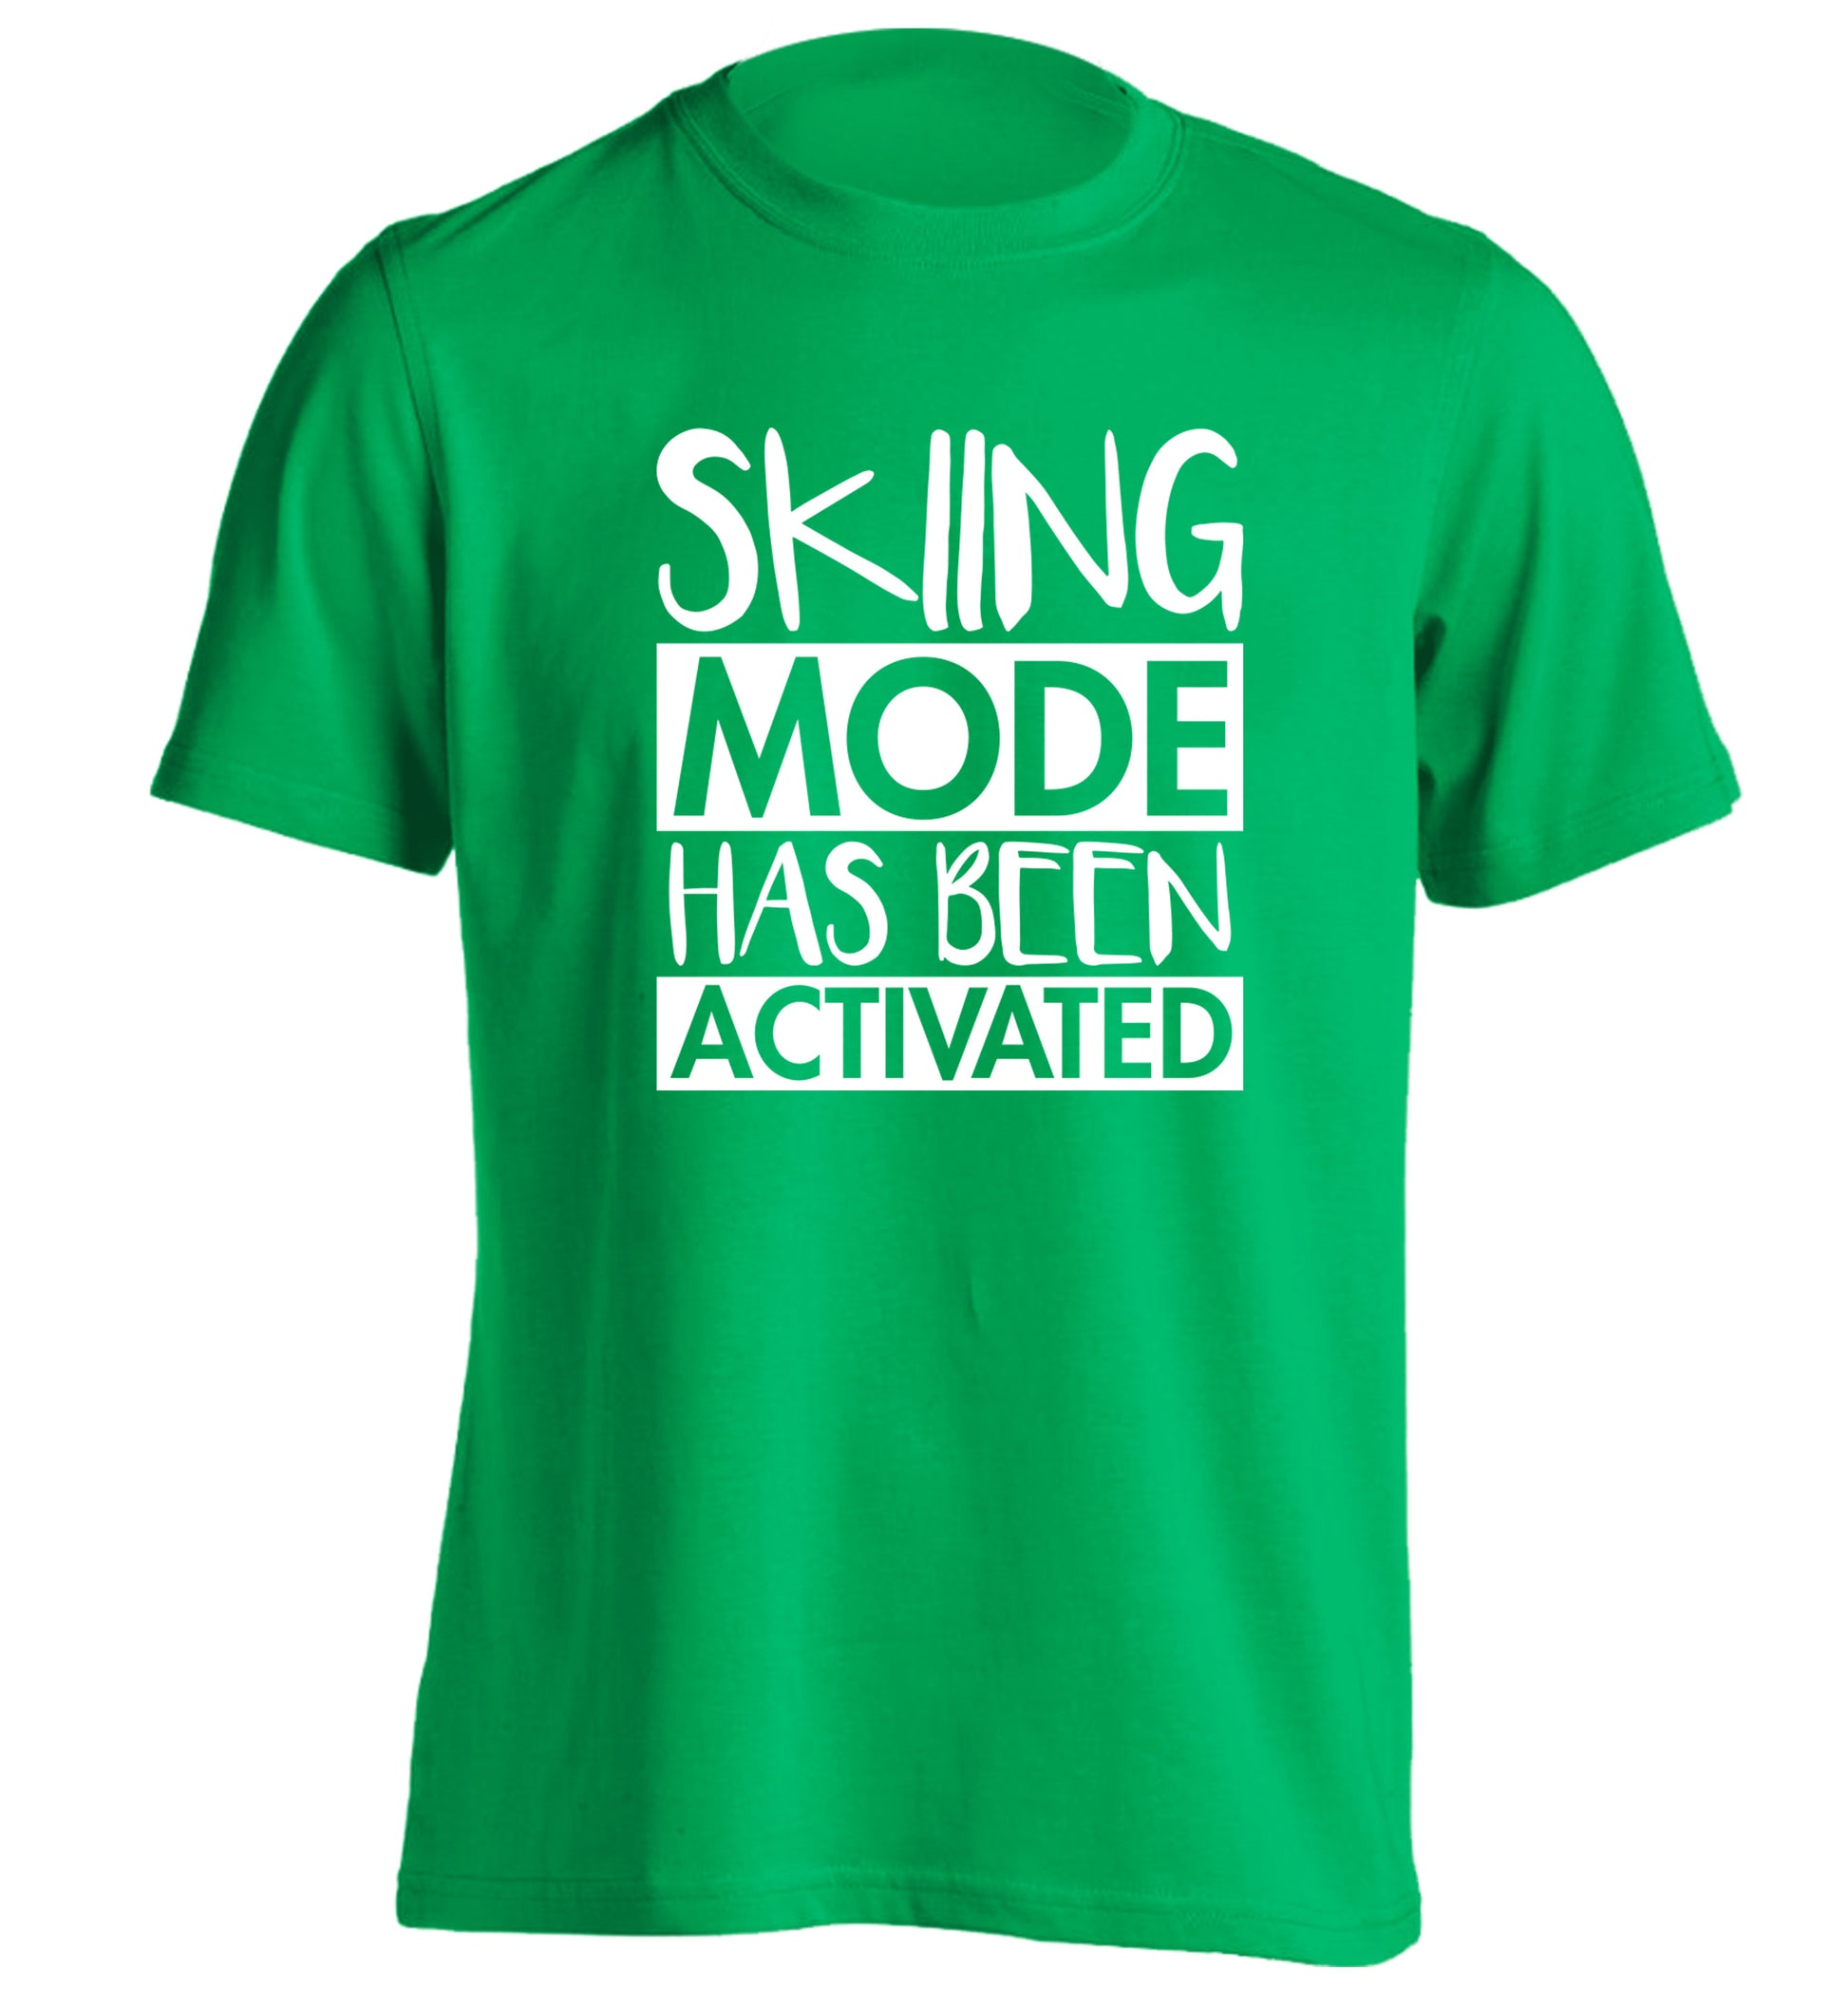 Skiing mode activated adults unisexgreen Tshirt 2XL